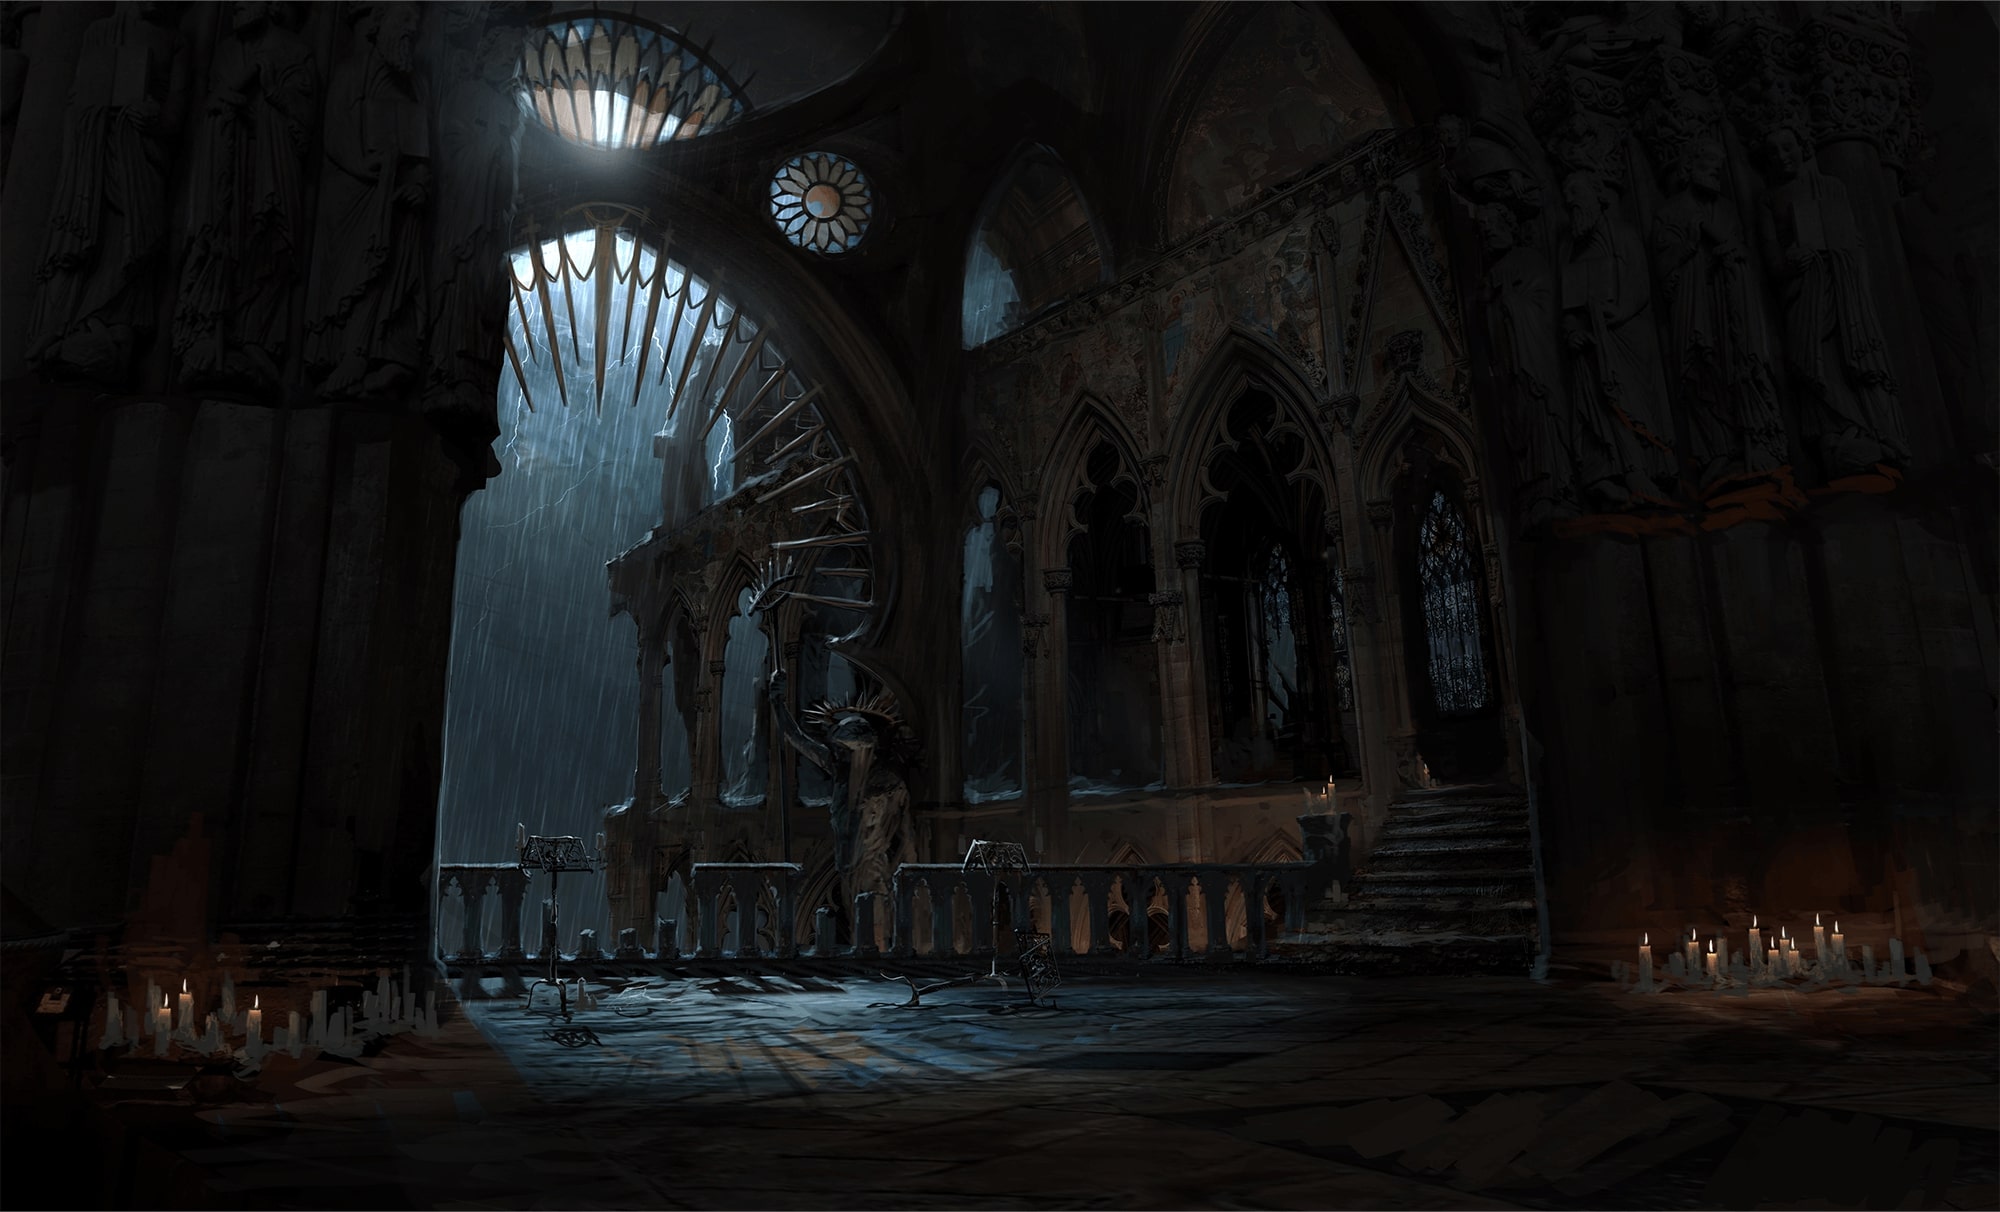 The expansive interior with an eery presence awaits the crusader in the world of The World of The Fallen